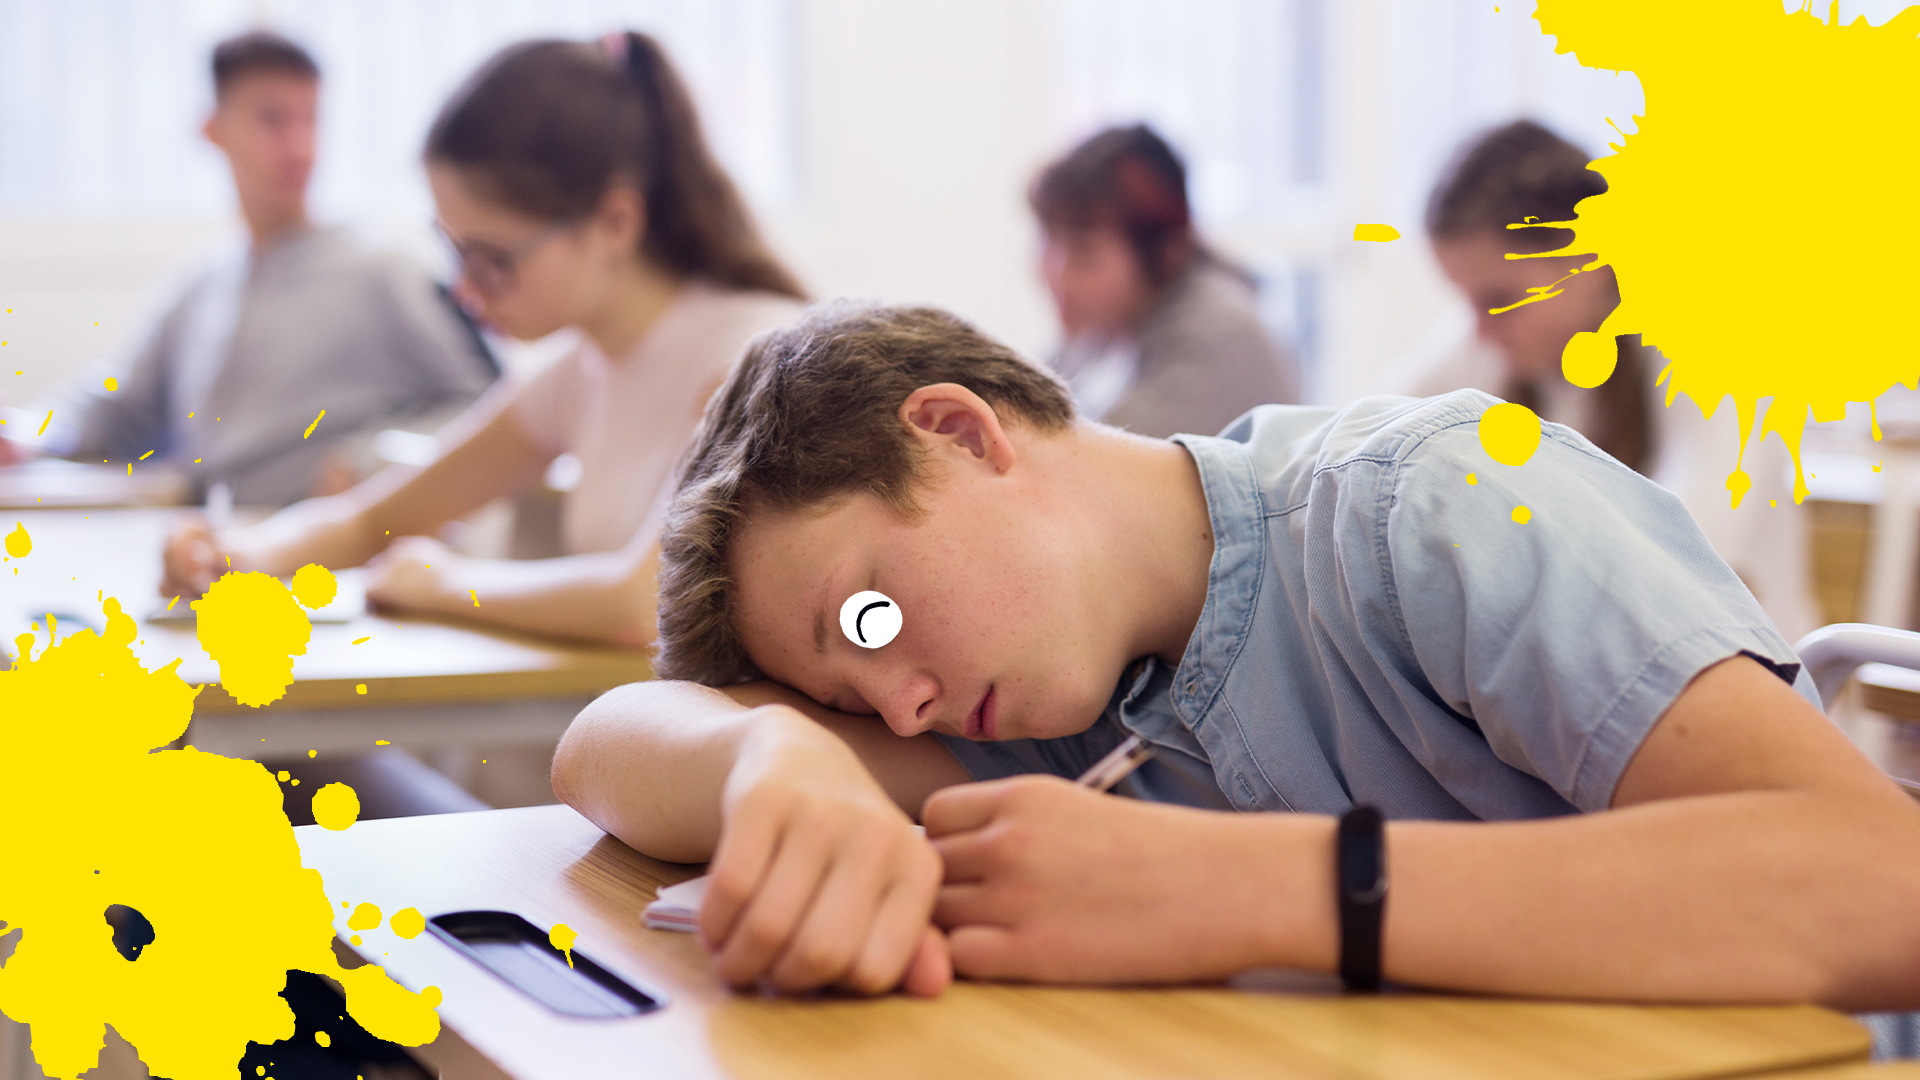 Boy sleeping in class with yellow splats